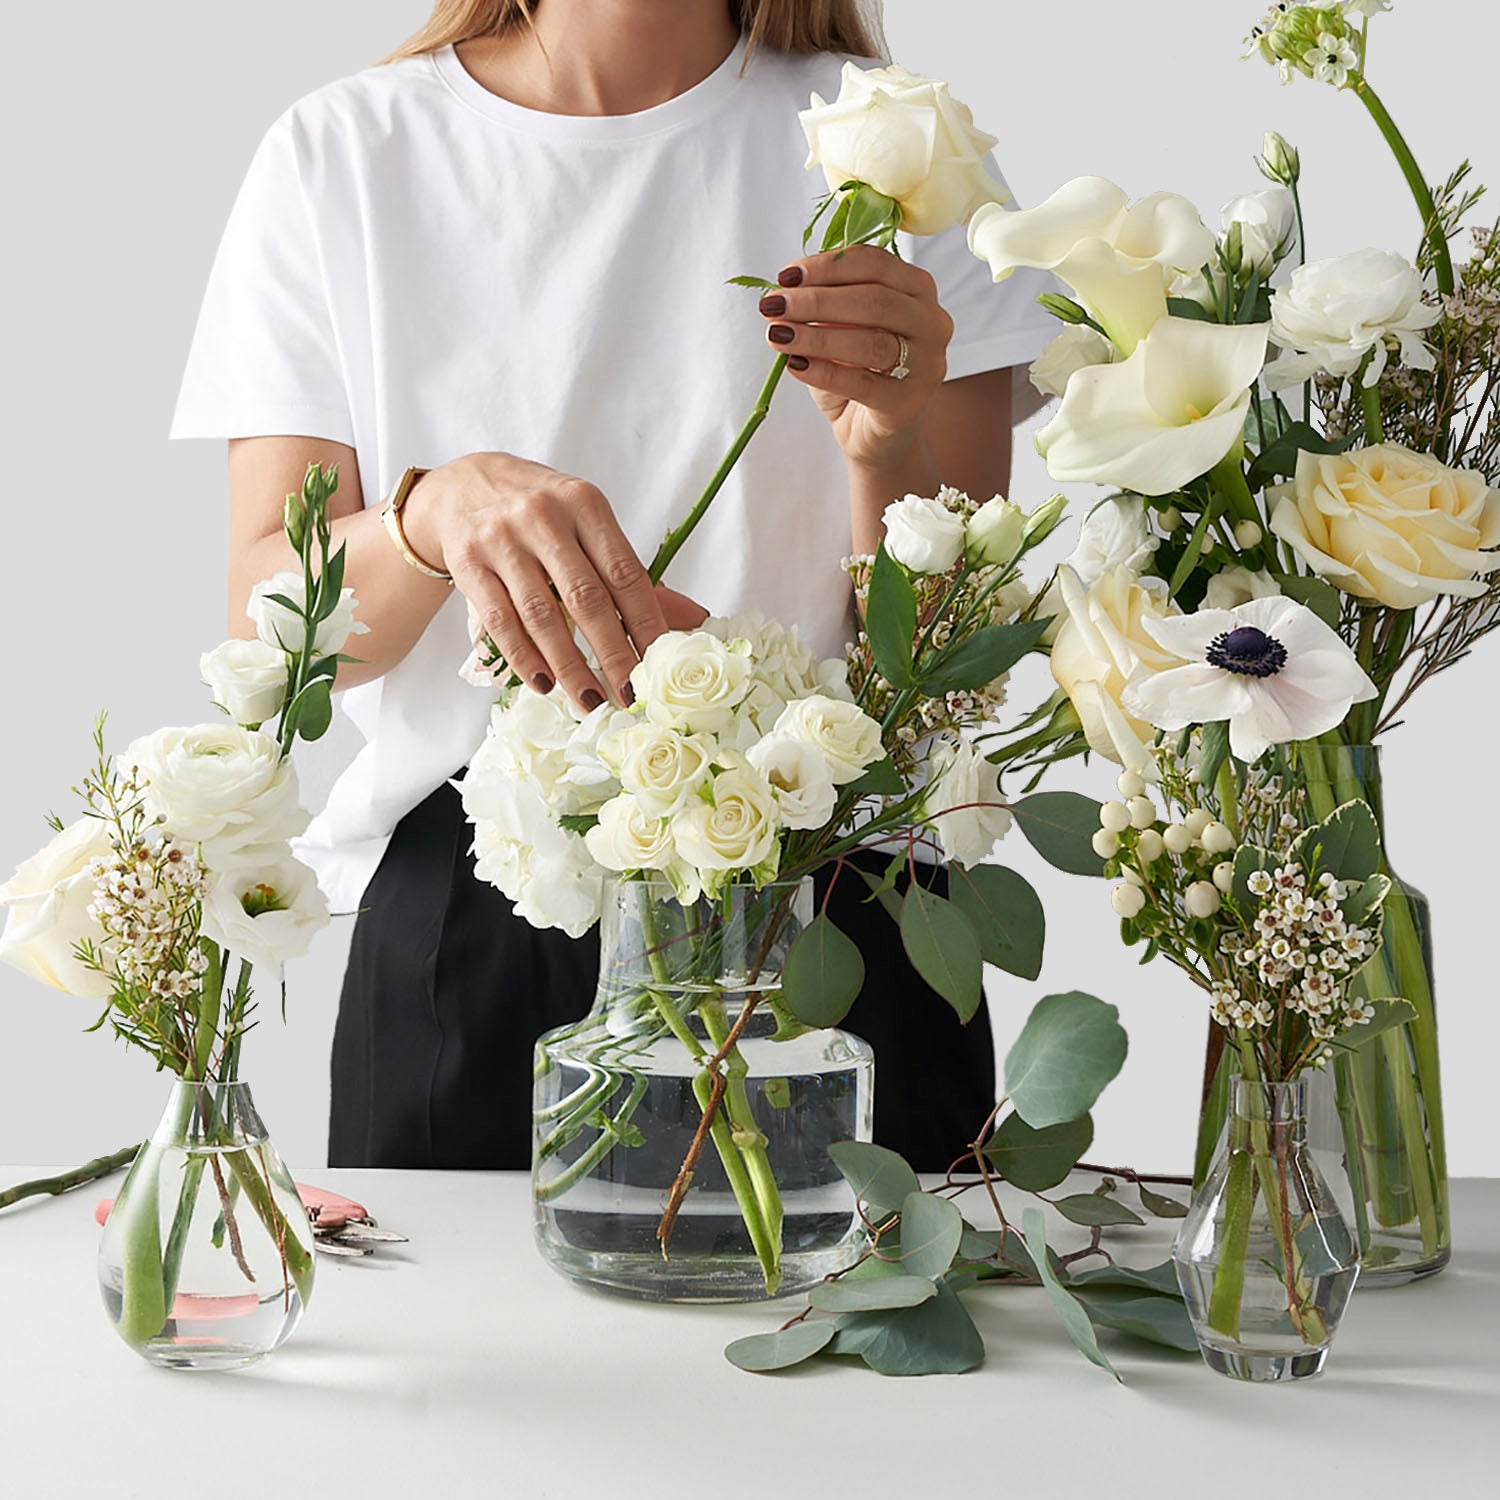 Woman in white shirt placing white rose into glass vase surrounded by other white flowers. 